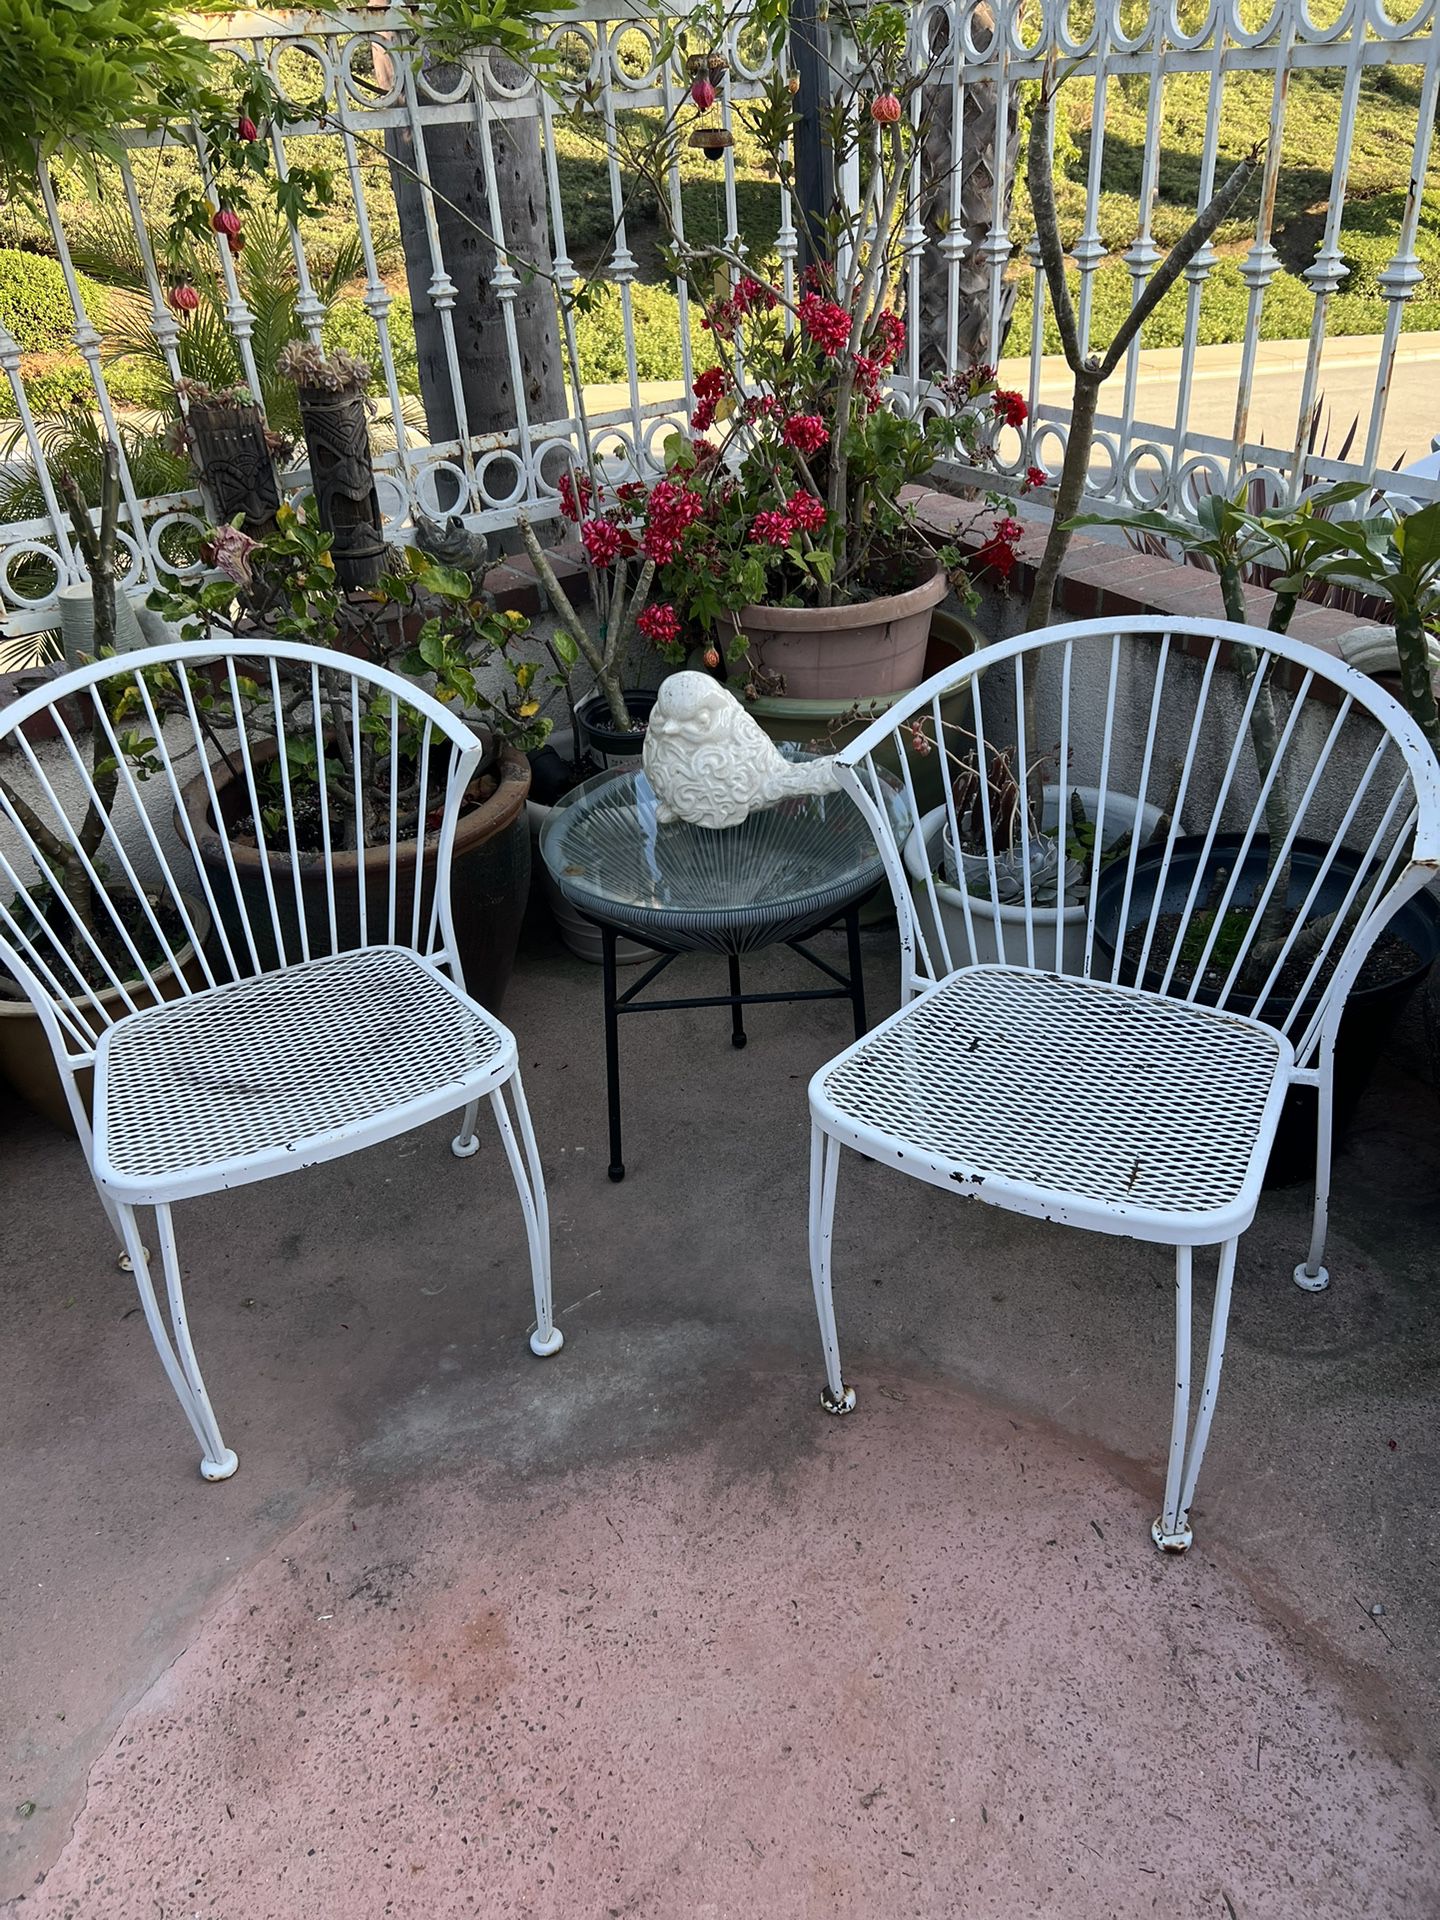 Bistro Set, Wrought Item Chairs, Normal Signs Of Used, Very Steady $49 